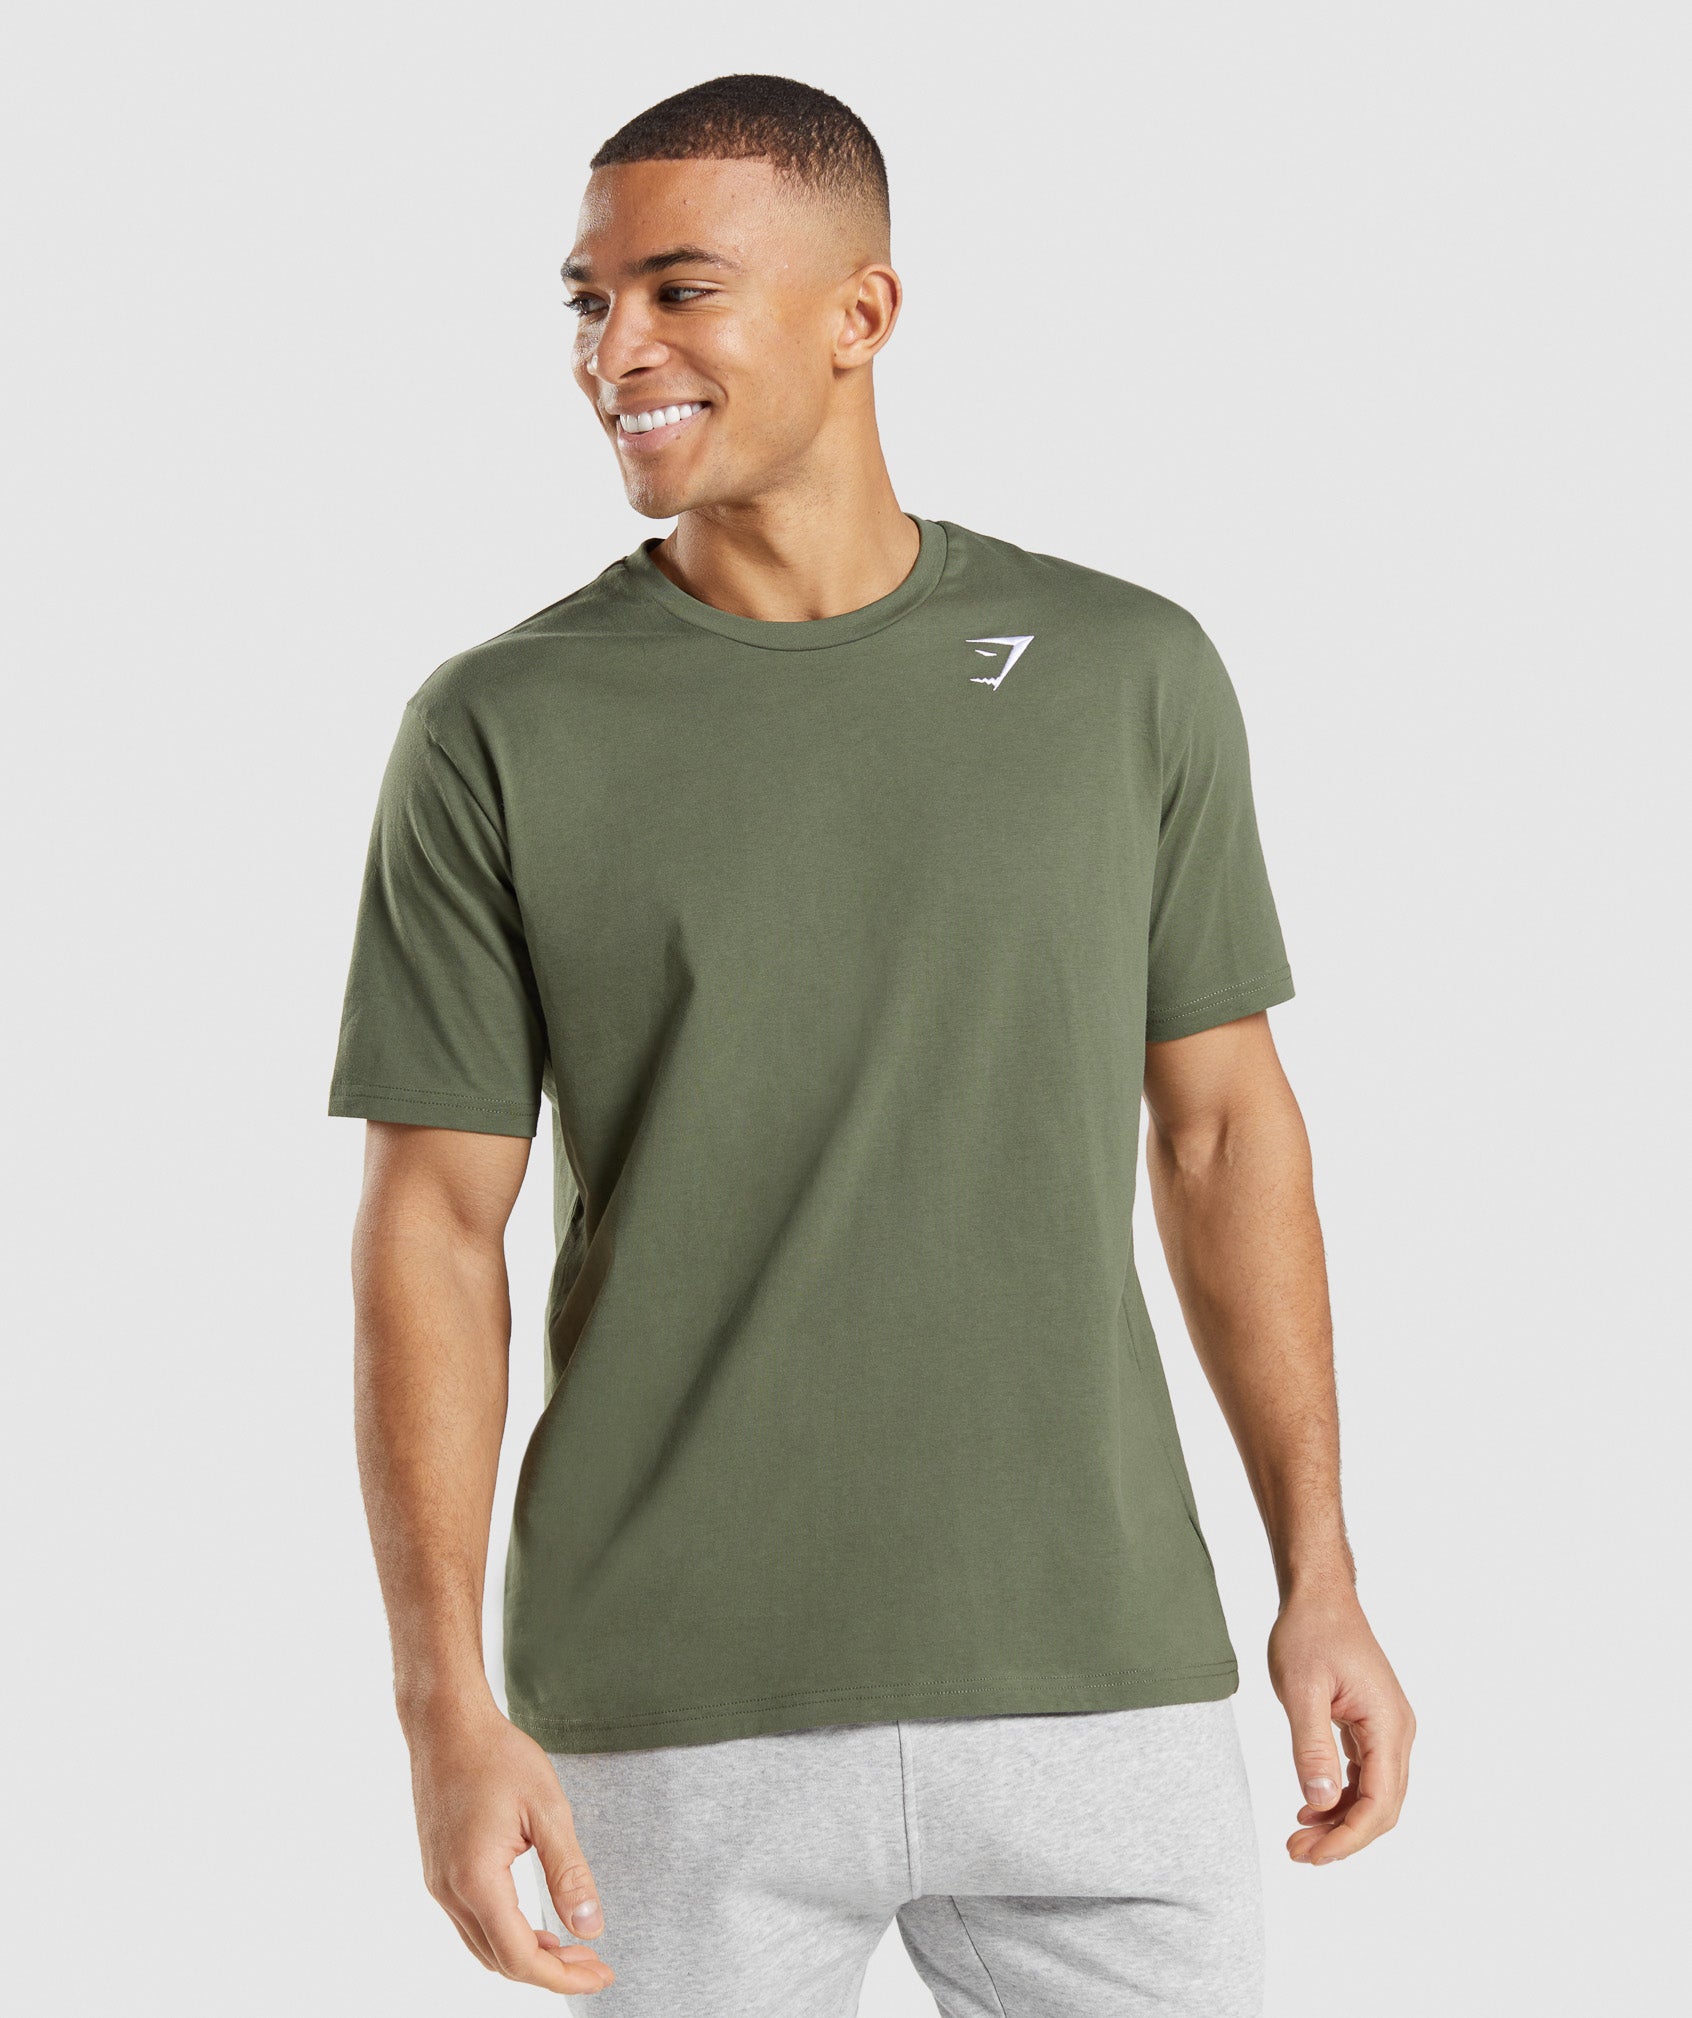 Crest T-Shirt in Core Olive is out of stock